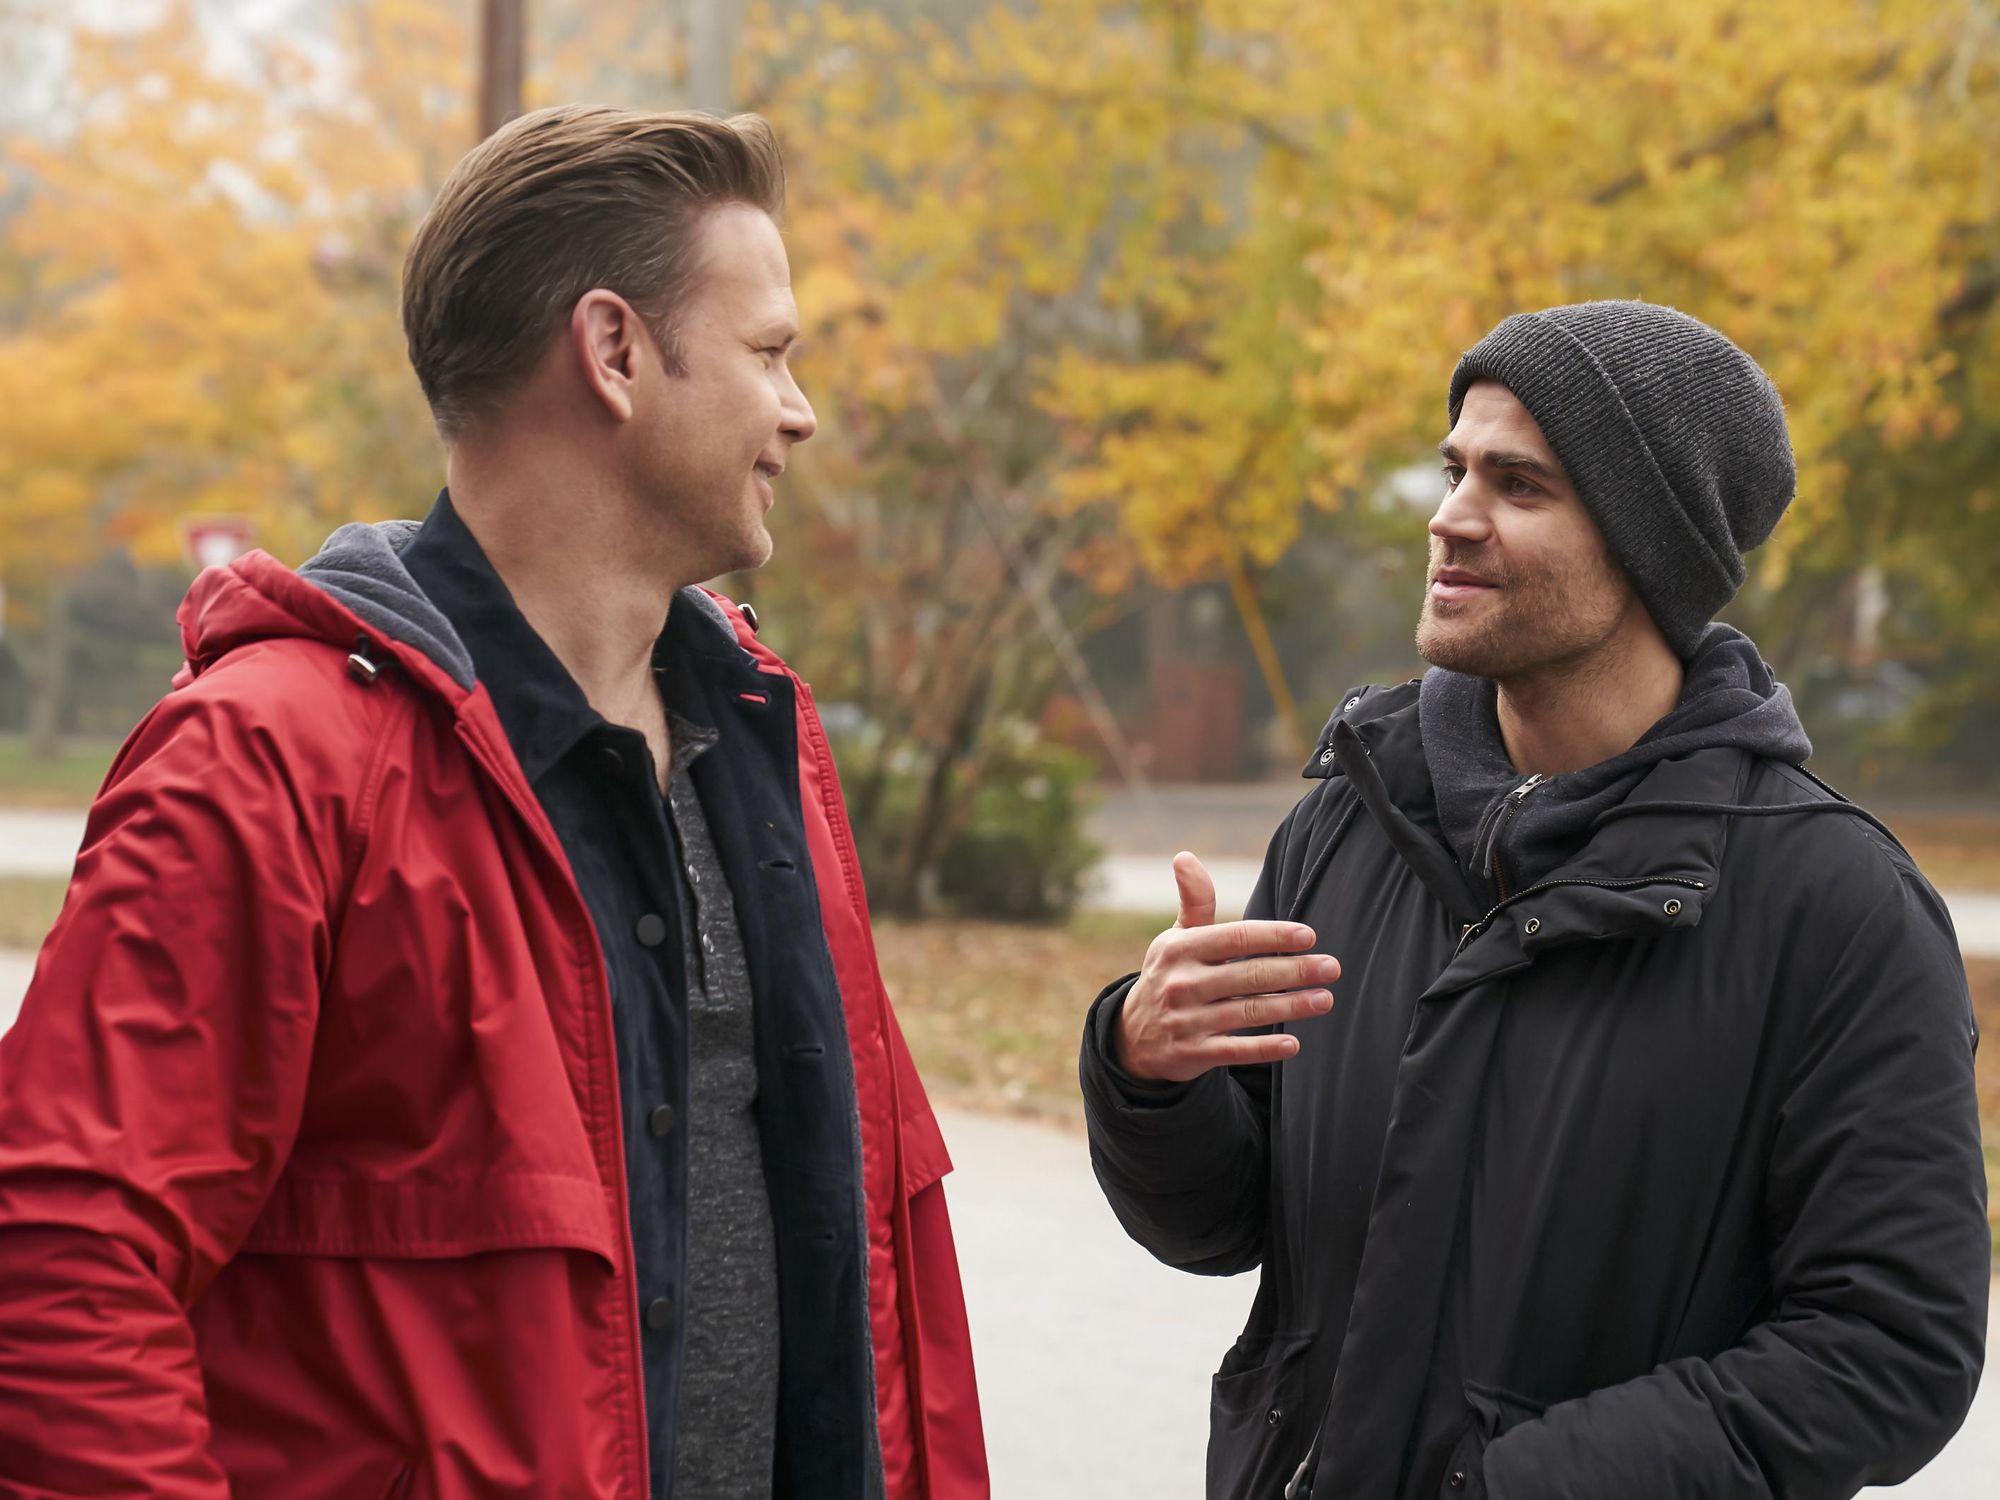 Paul Wesley and Matthew Davis smile and chat near a line of trees covered in fall foliage on the set of Legacies